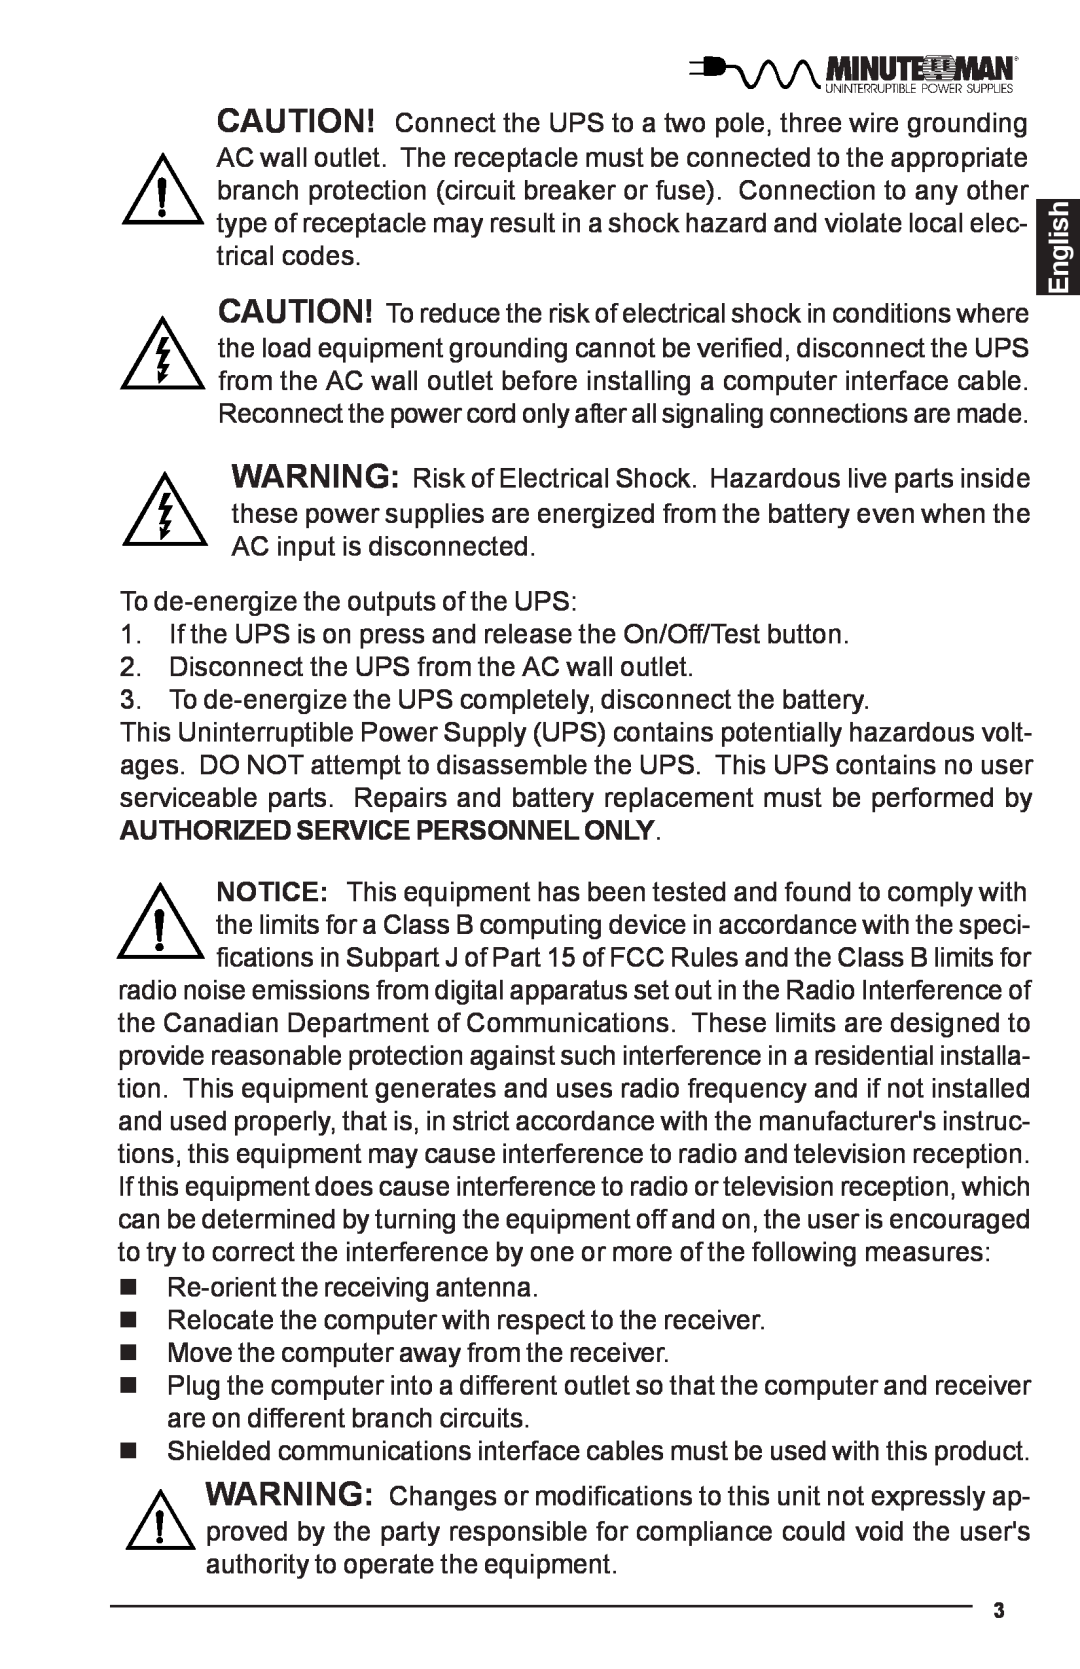 Minuteman UPS PRO-E user manual English, Authorized Service Personnel Only 